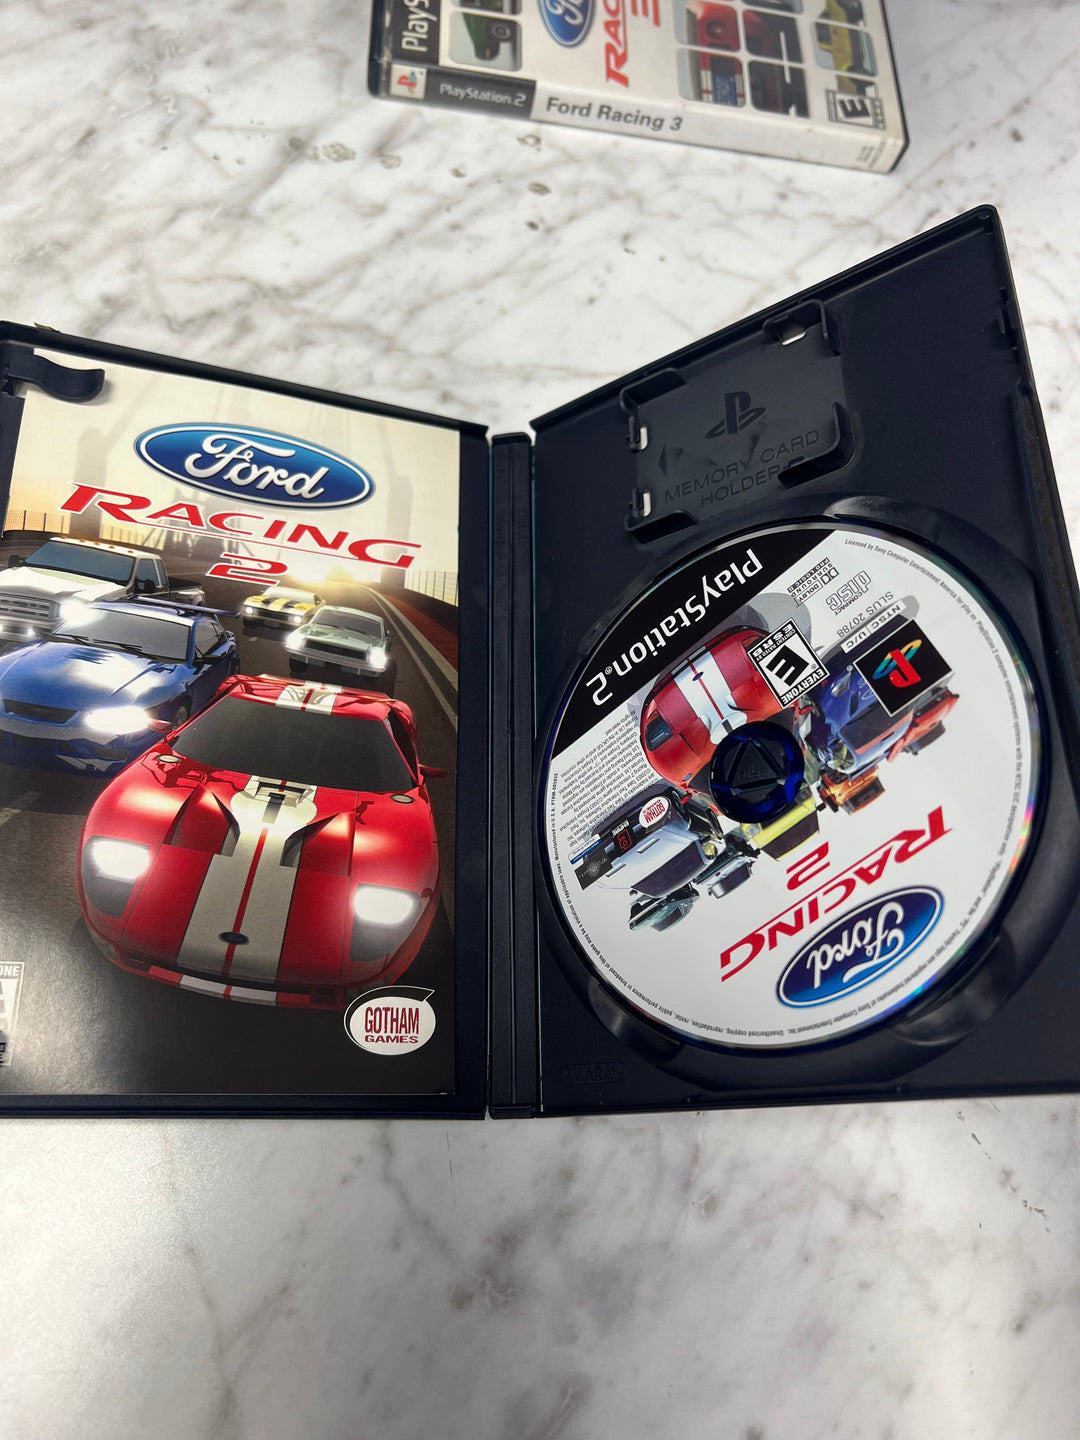 Ford Racing 2 for Playstation 2 PS2 in case. Tested and Working.     DO62924